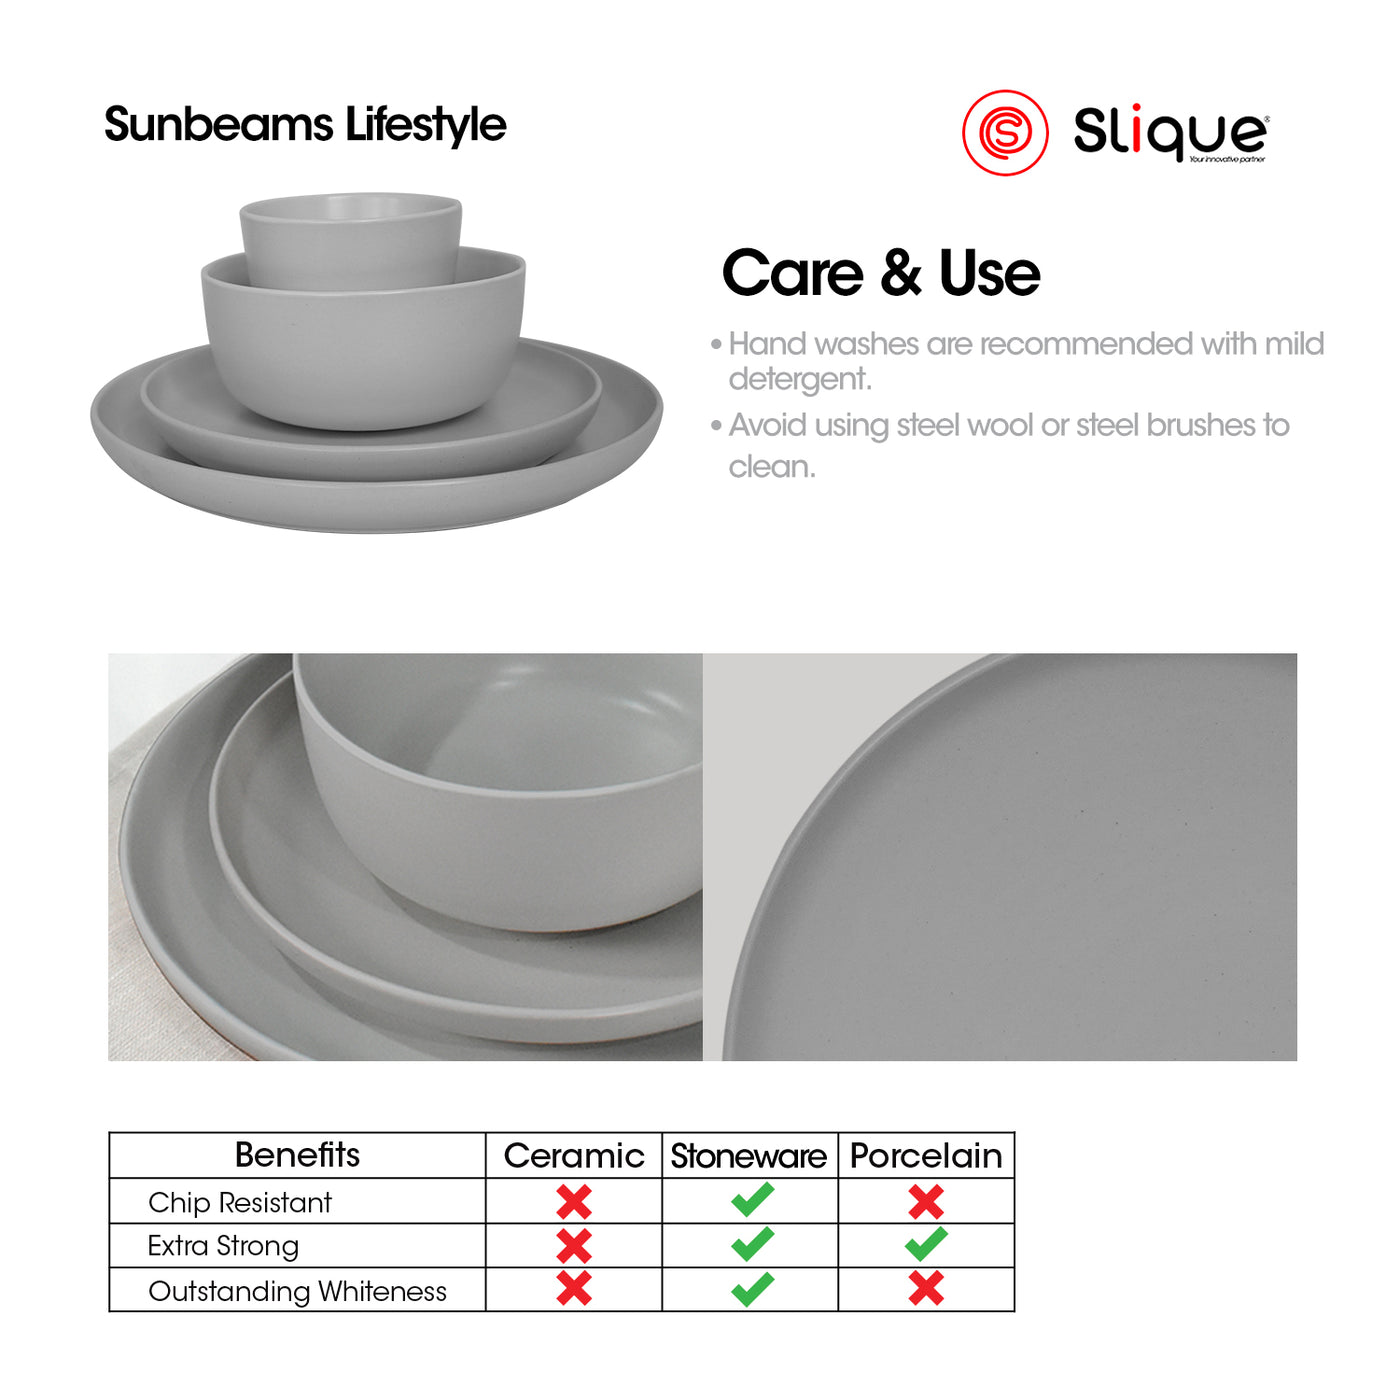 Slique Dinnerware [Set of 4] Glazed Stoneware High Quality, Ceramic Surface, Chip resistant, Element Collection